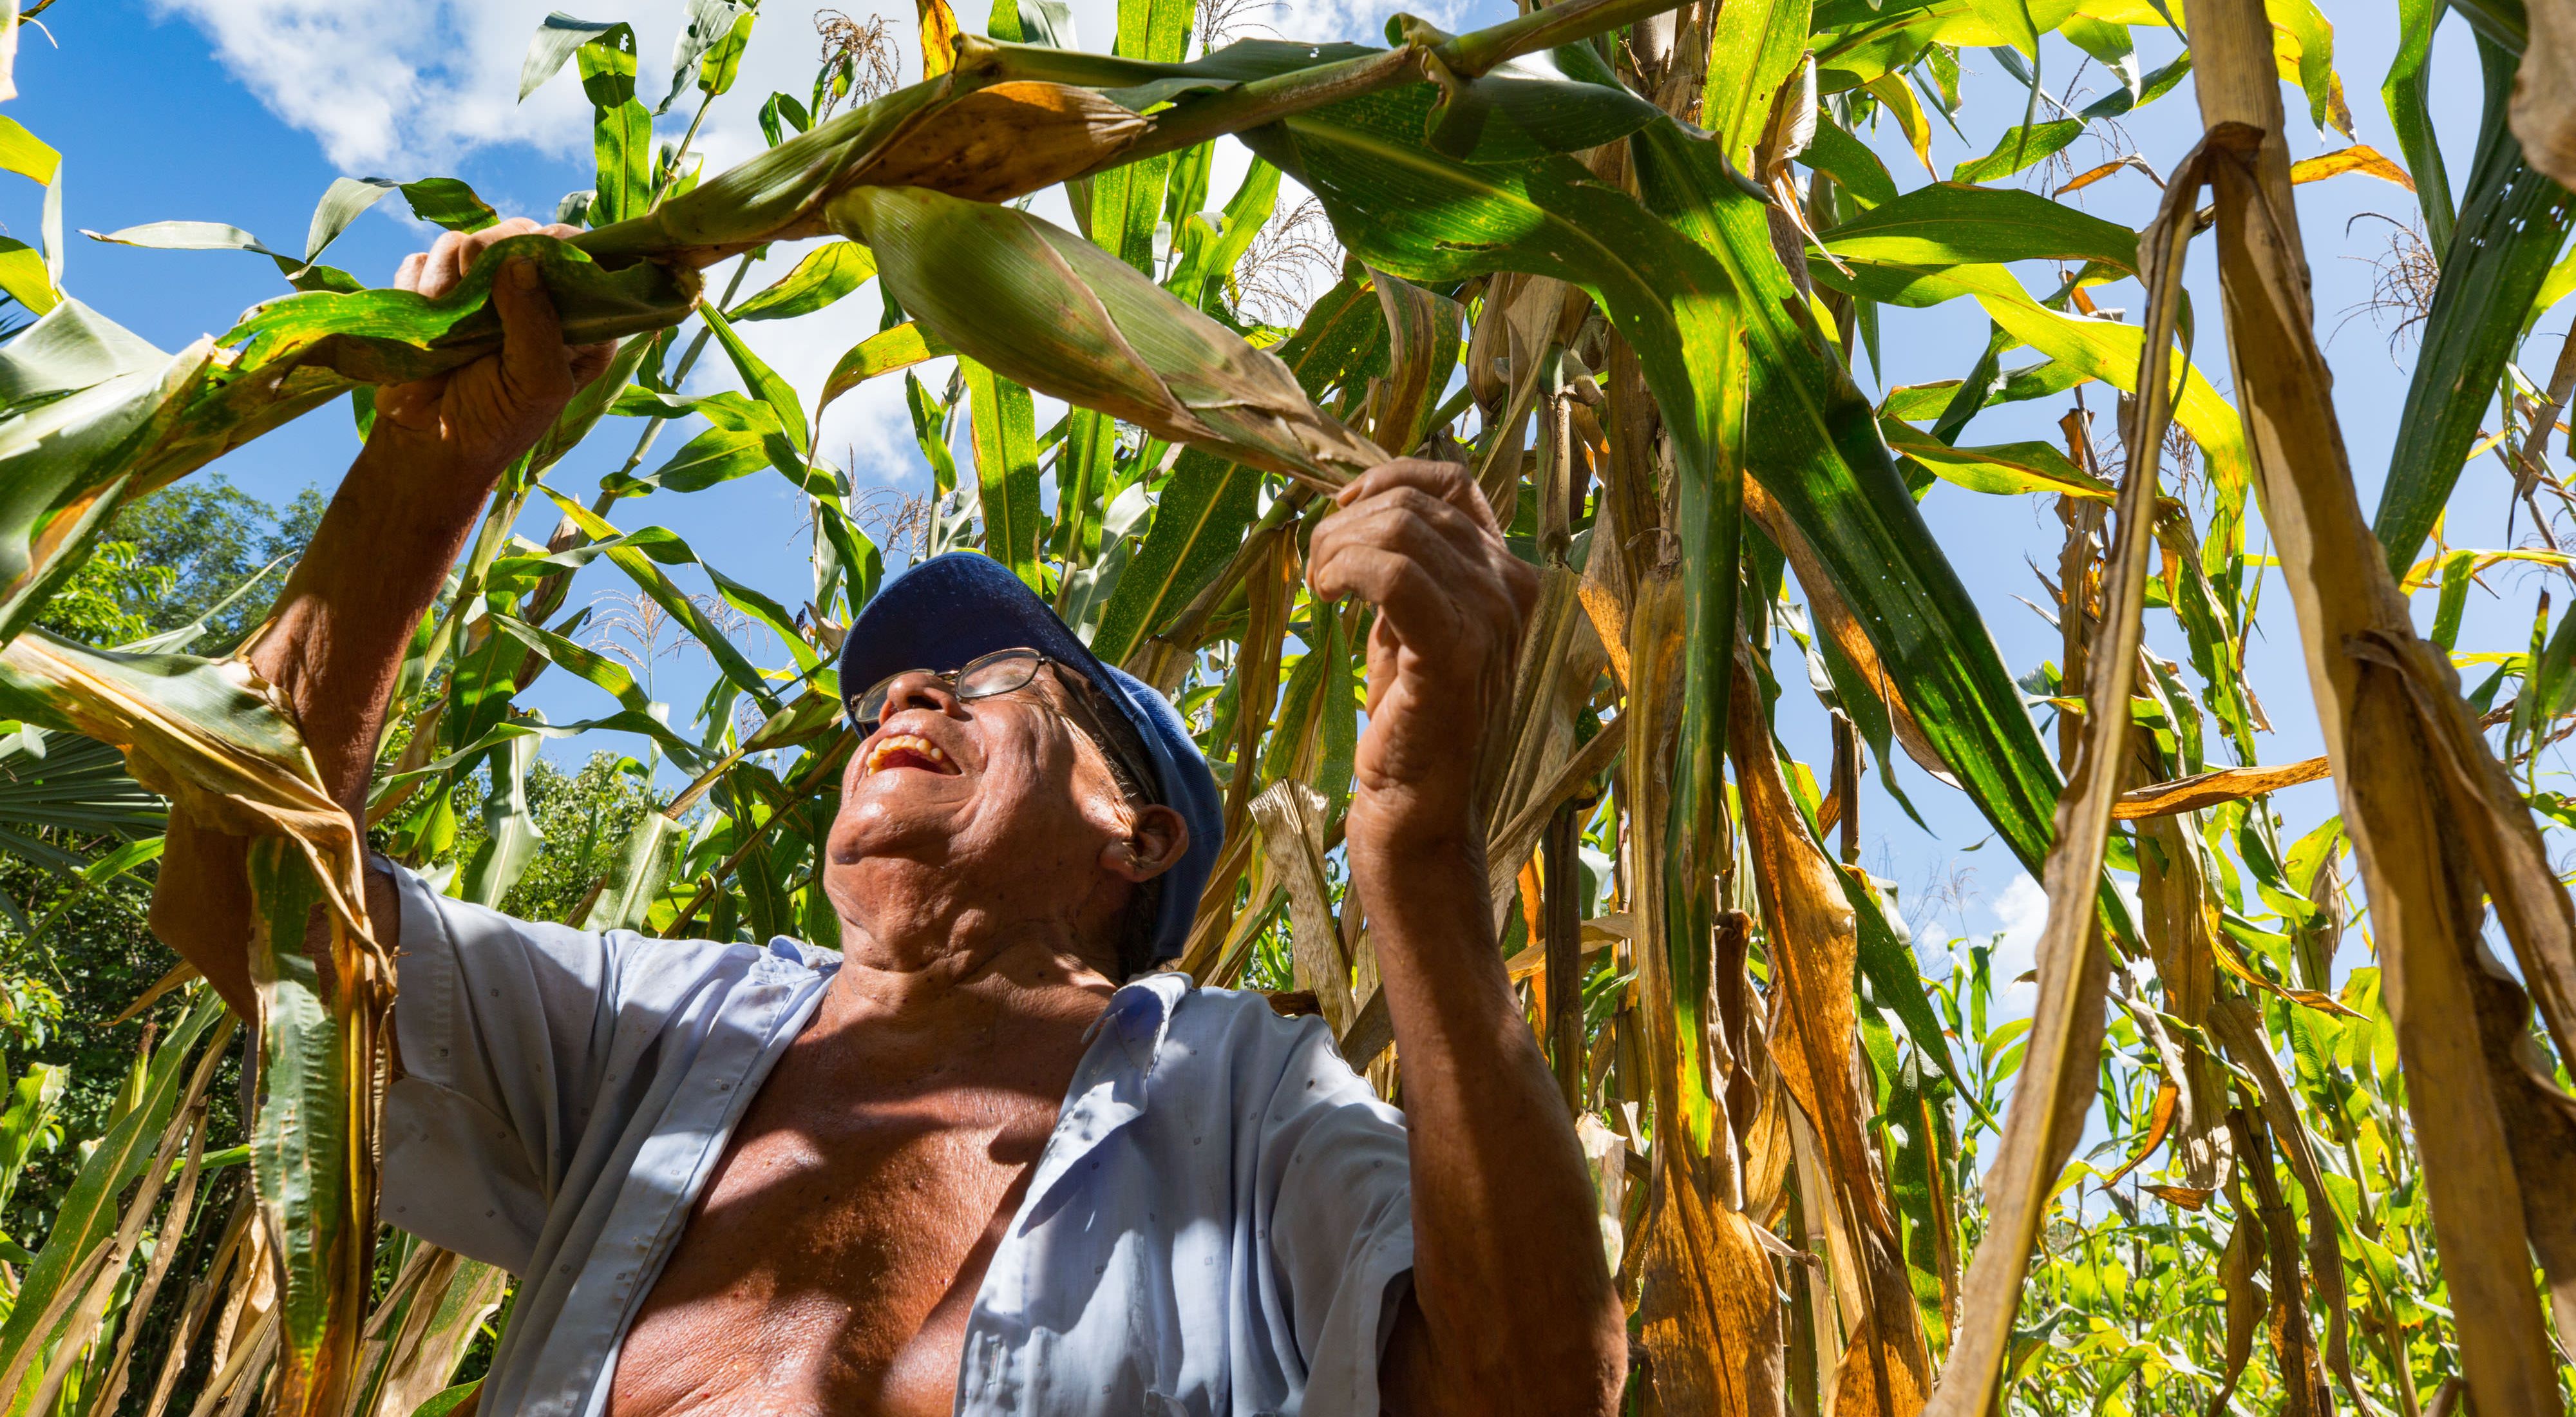 A man looks up into the high stalks of corn in his agricultural field